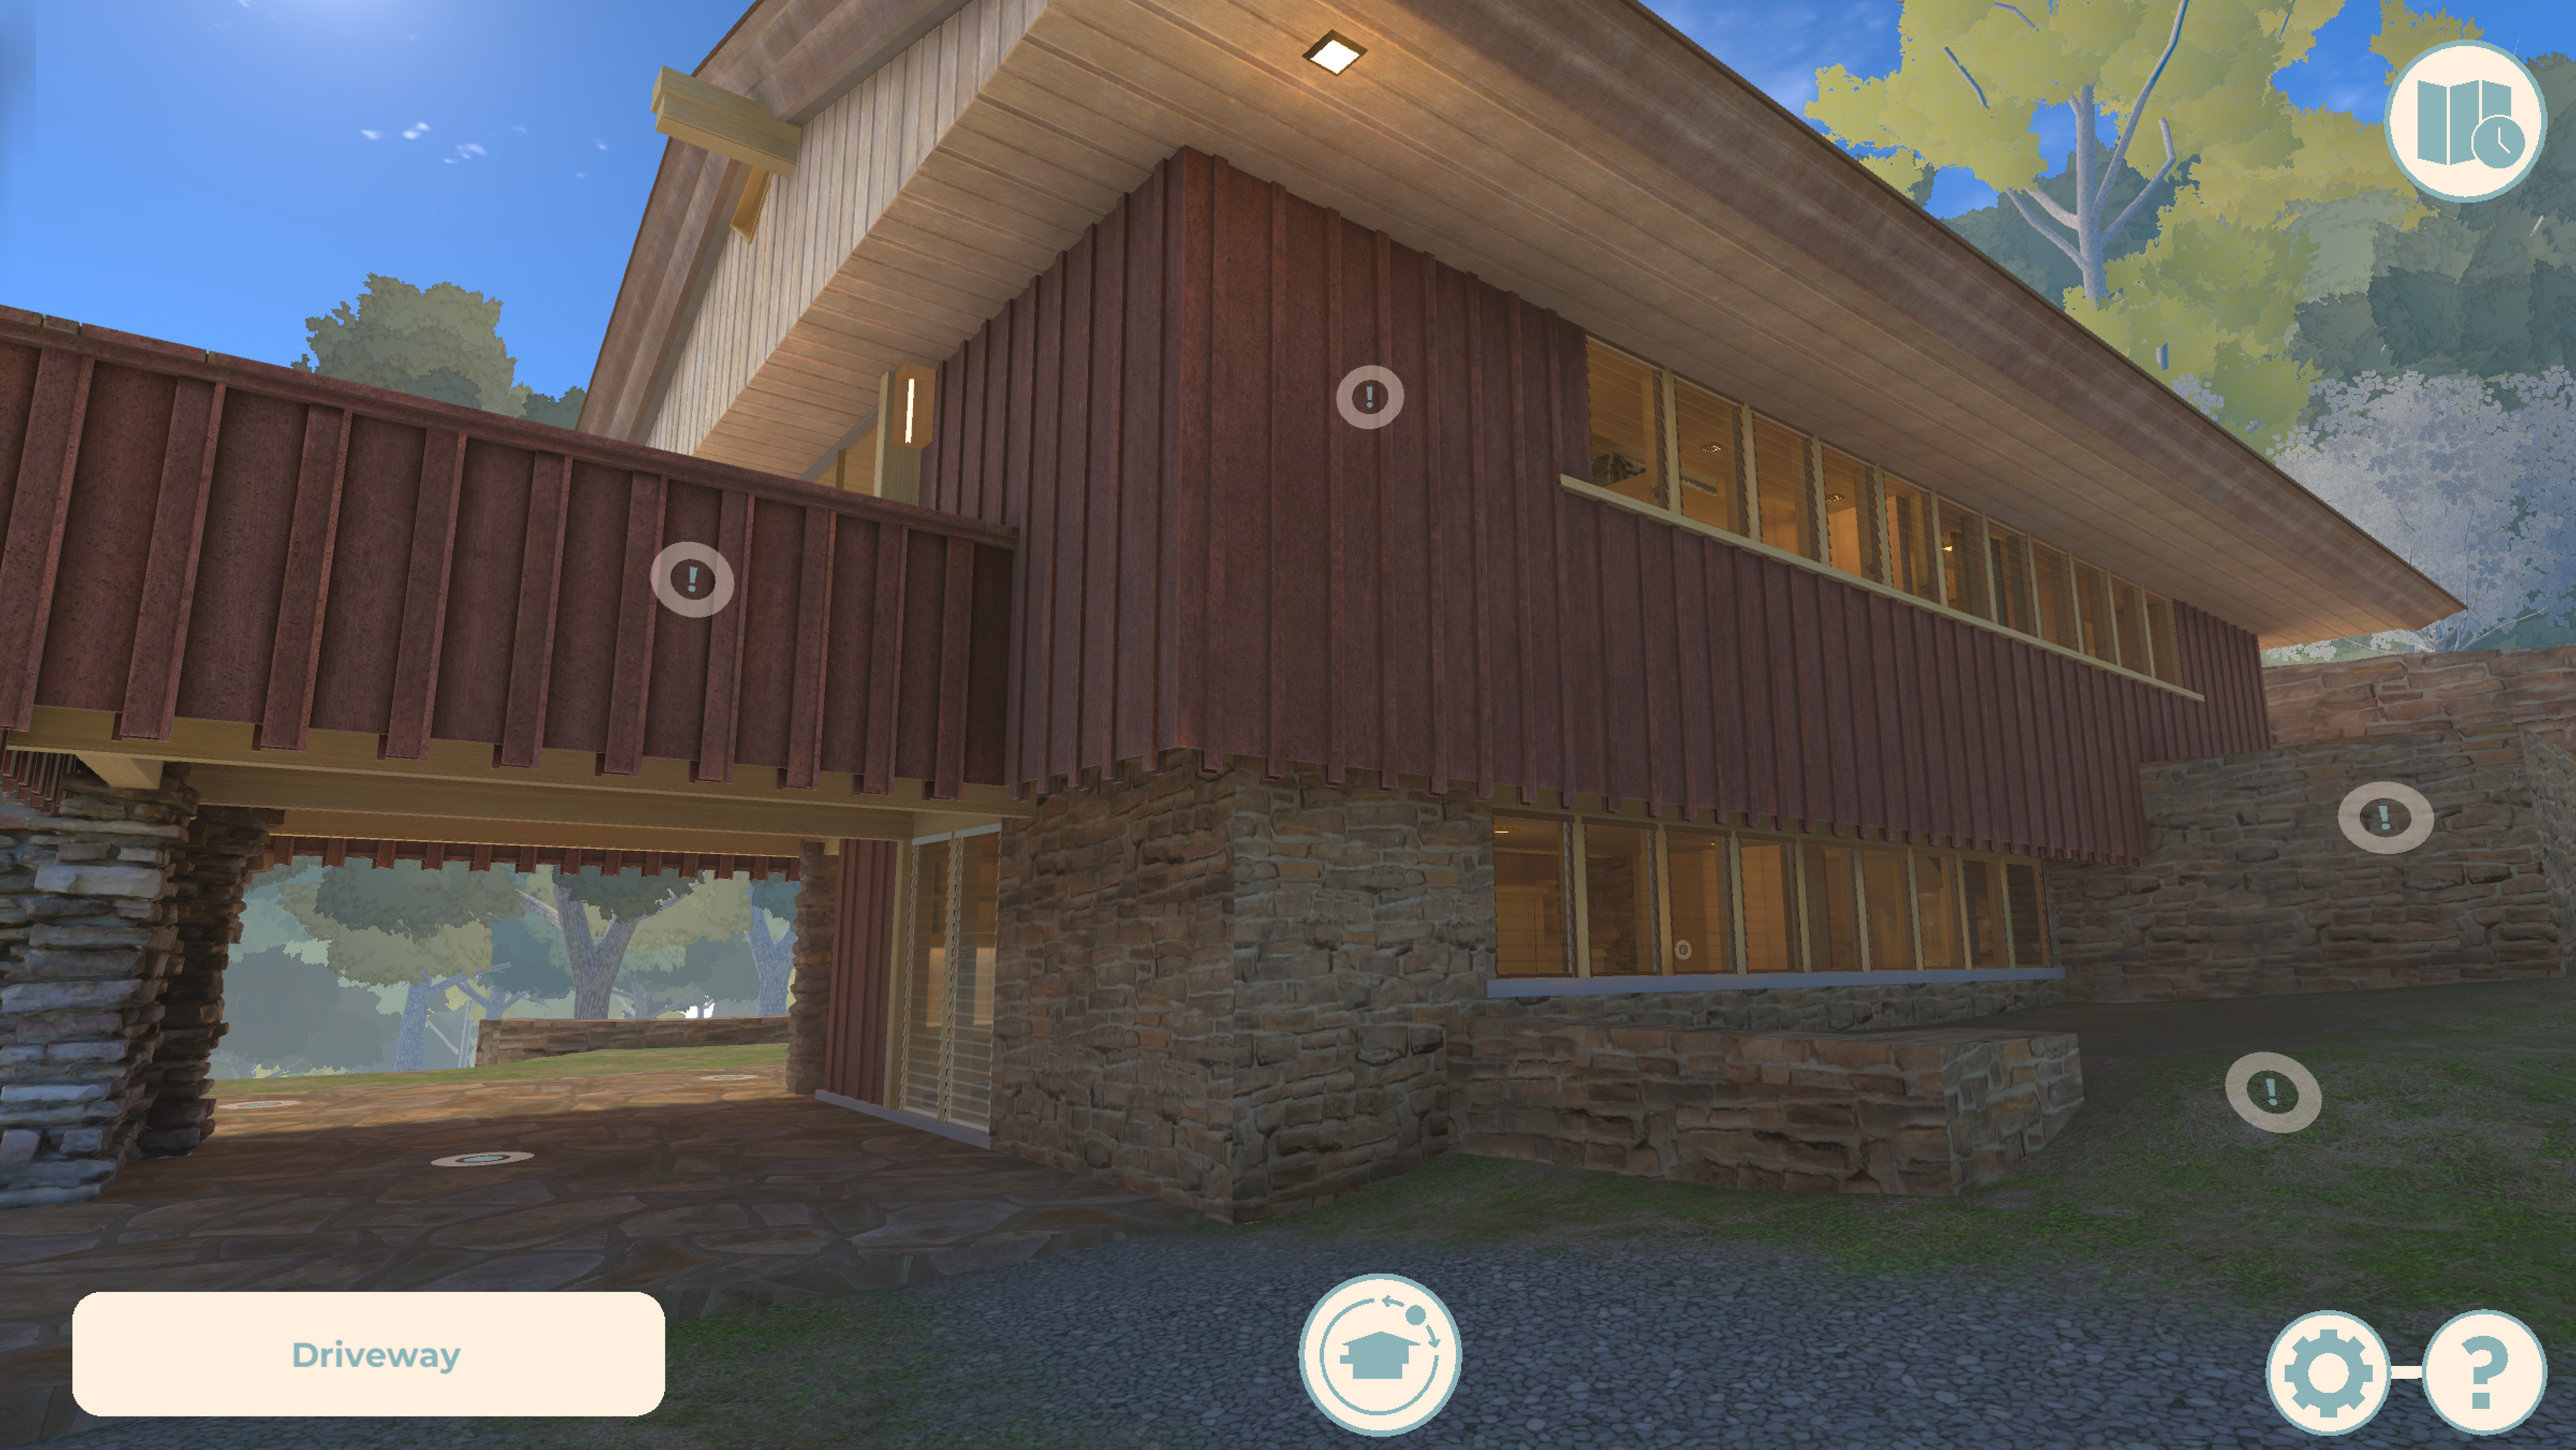 Once on the ground in first-person mode, the player is presented with two major forms of interaction; discovering documents and information about the house by clicking on information nodes, and walking through the house via on-rails walking nodes.